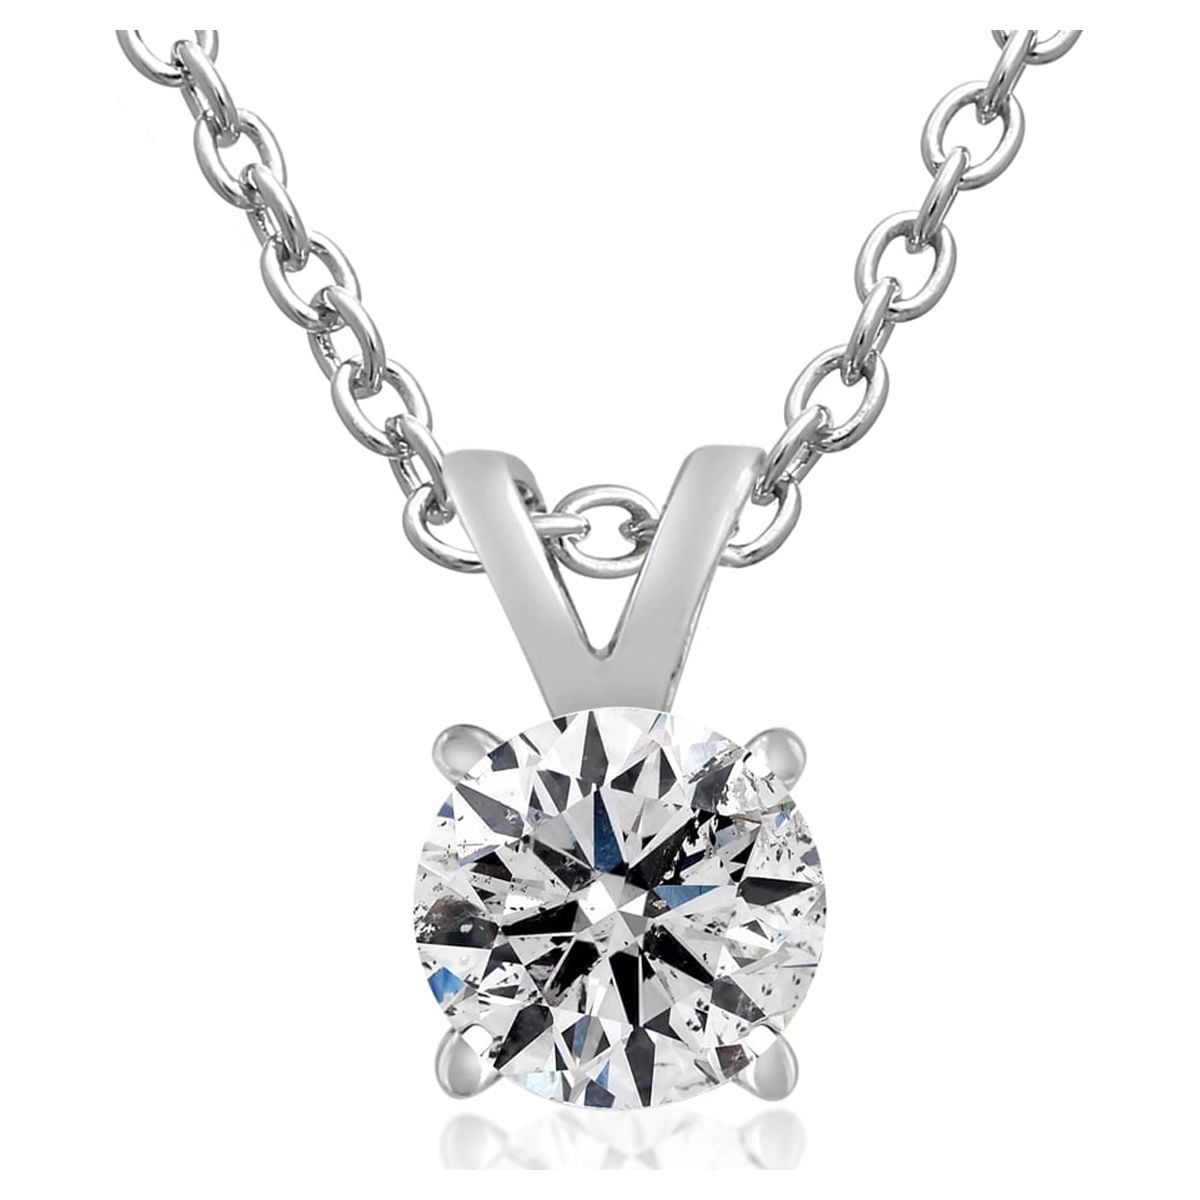 1 Carat Bezel Set Diamond Solitaire Necklace in 14K White Gold, 18 Inches |  SuperJeweler